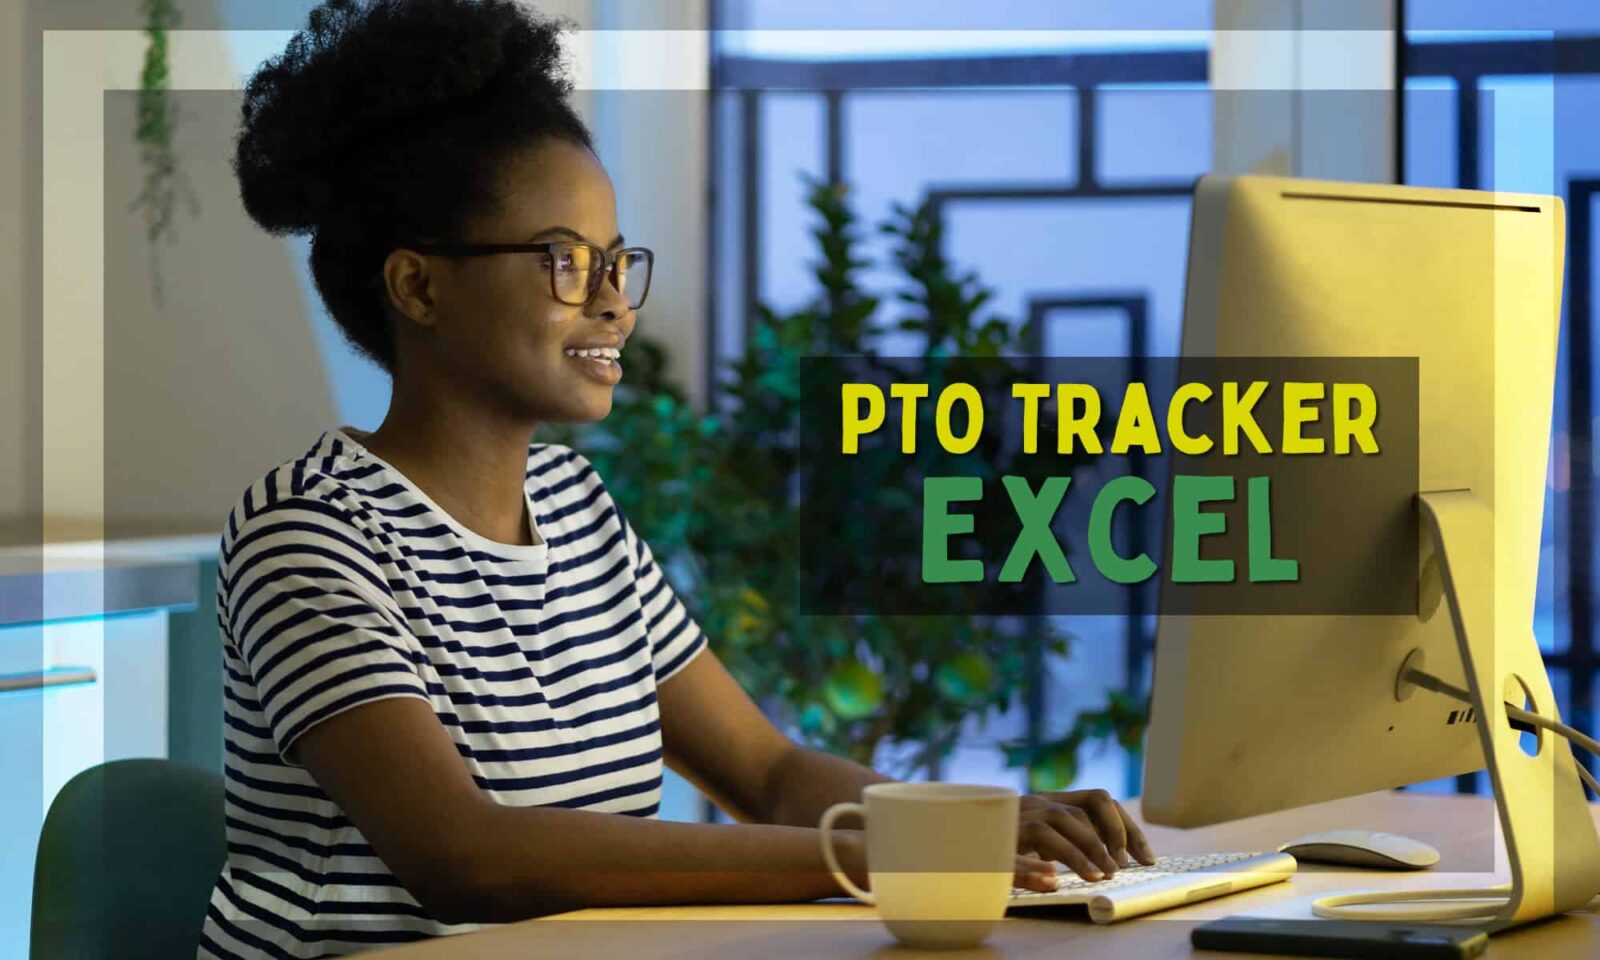 How to Track Pto in Excel